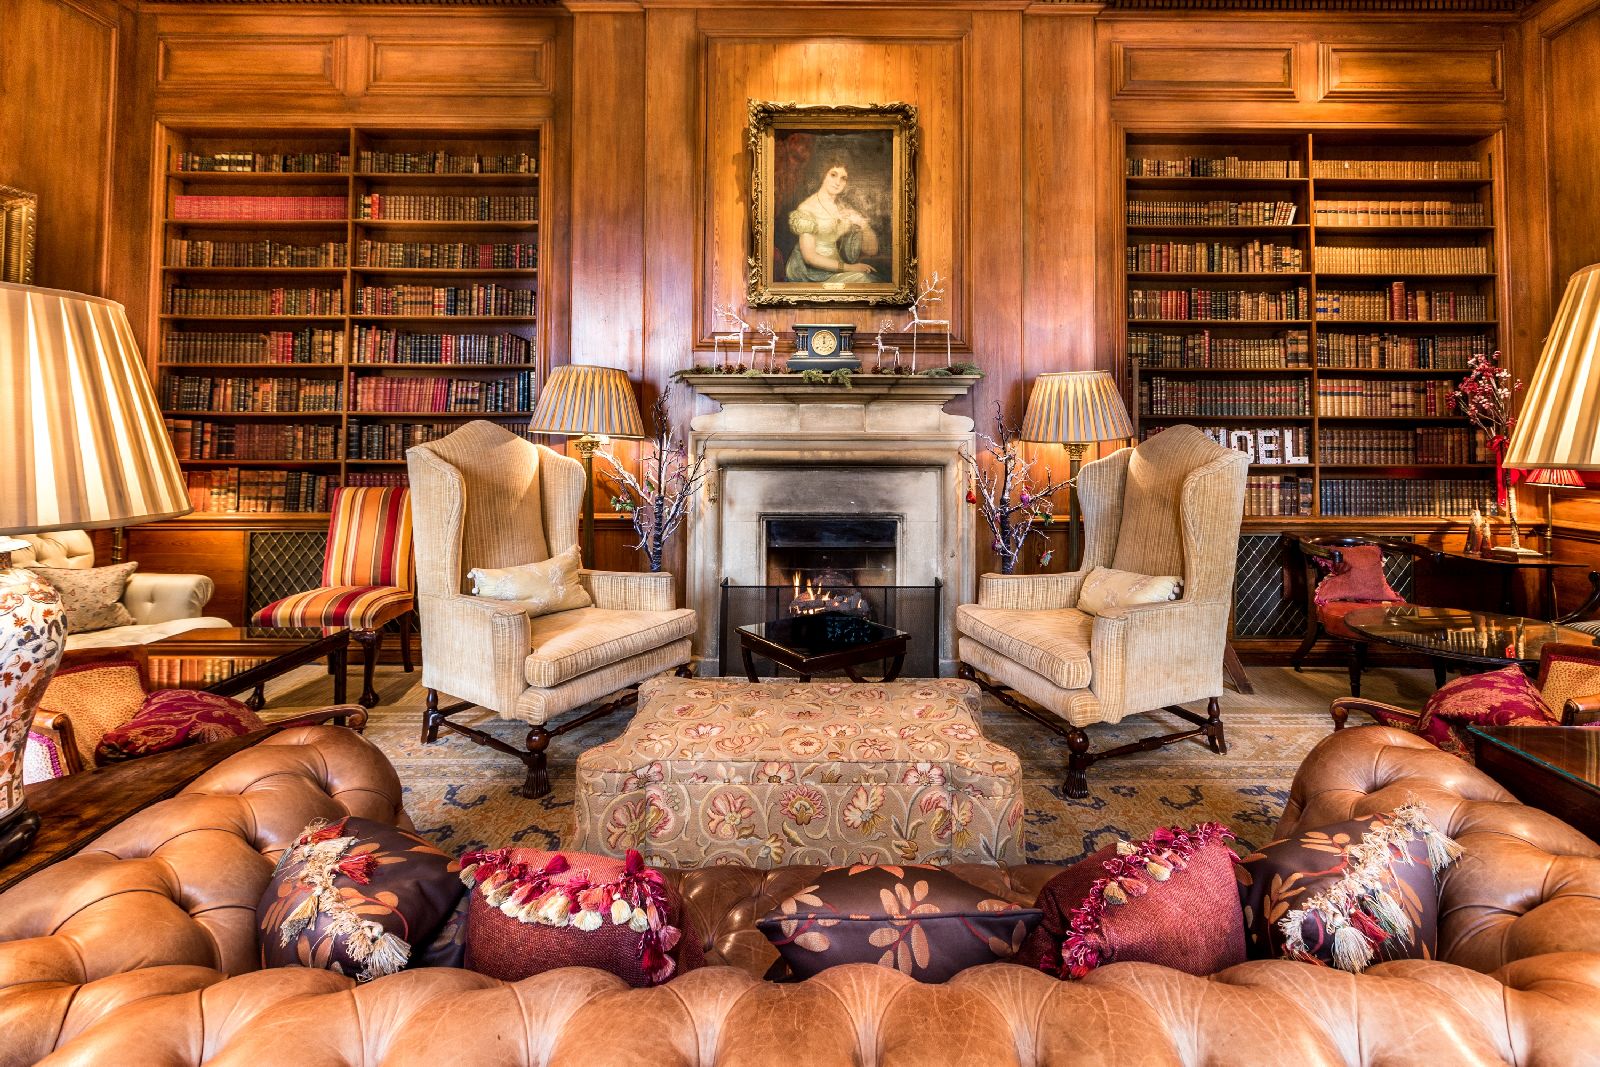 The library and fireplace at Lucknam Park hotel in the Cotswolds England